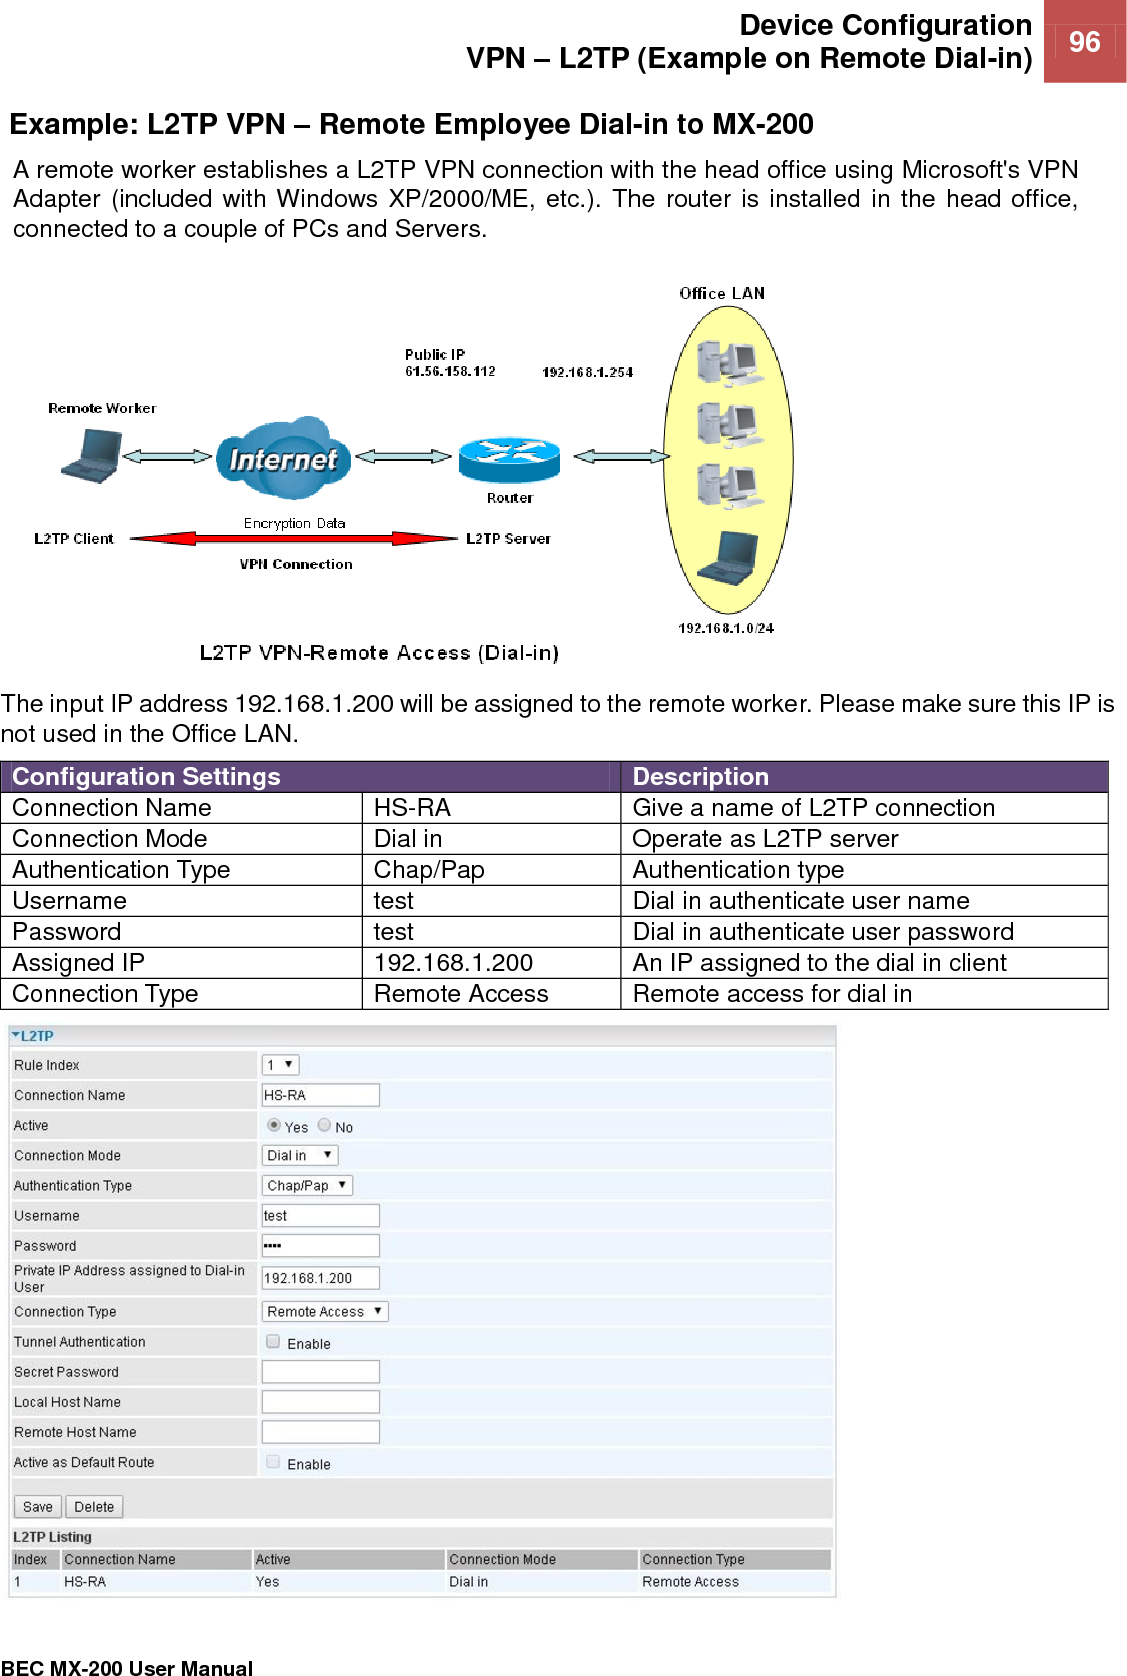  Device Configuration VPN – L2TP (Example on Remote Dial-in) 96   BEC MX-200 User Manual   Example: L2TP VPN – Remote Employee Dial-in to MX-200 A remote worker establishes a L2TP VPN connection with the head office using Microsoft&apos;s VPN Adapter (included with Windows XP/2000/ME, etc.). The router is installed in the head office, connected to a couple of PCs and Servers.  The input IP address 192.168.1.200 will be assigned to the remote worker. Please make sure this IP is not used in the Office LAN. Configuration Settings Description Connection Name HS-RA Give a name of L2TP connection Connection Mode Dial in Operate as L2TP server Authentication Type Chap/Pap Authentication type Username test Dial in authenticate user name Password test Dial in authenticate user password Assigned IP 192.168.1.200 An IP assigned to the dial in client Connection Type Remote Access Remote access for dial in 